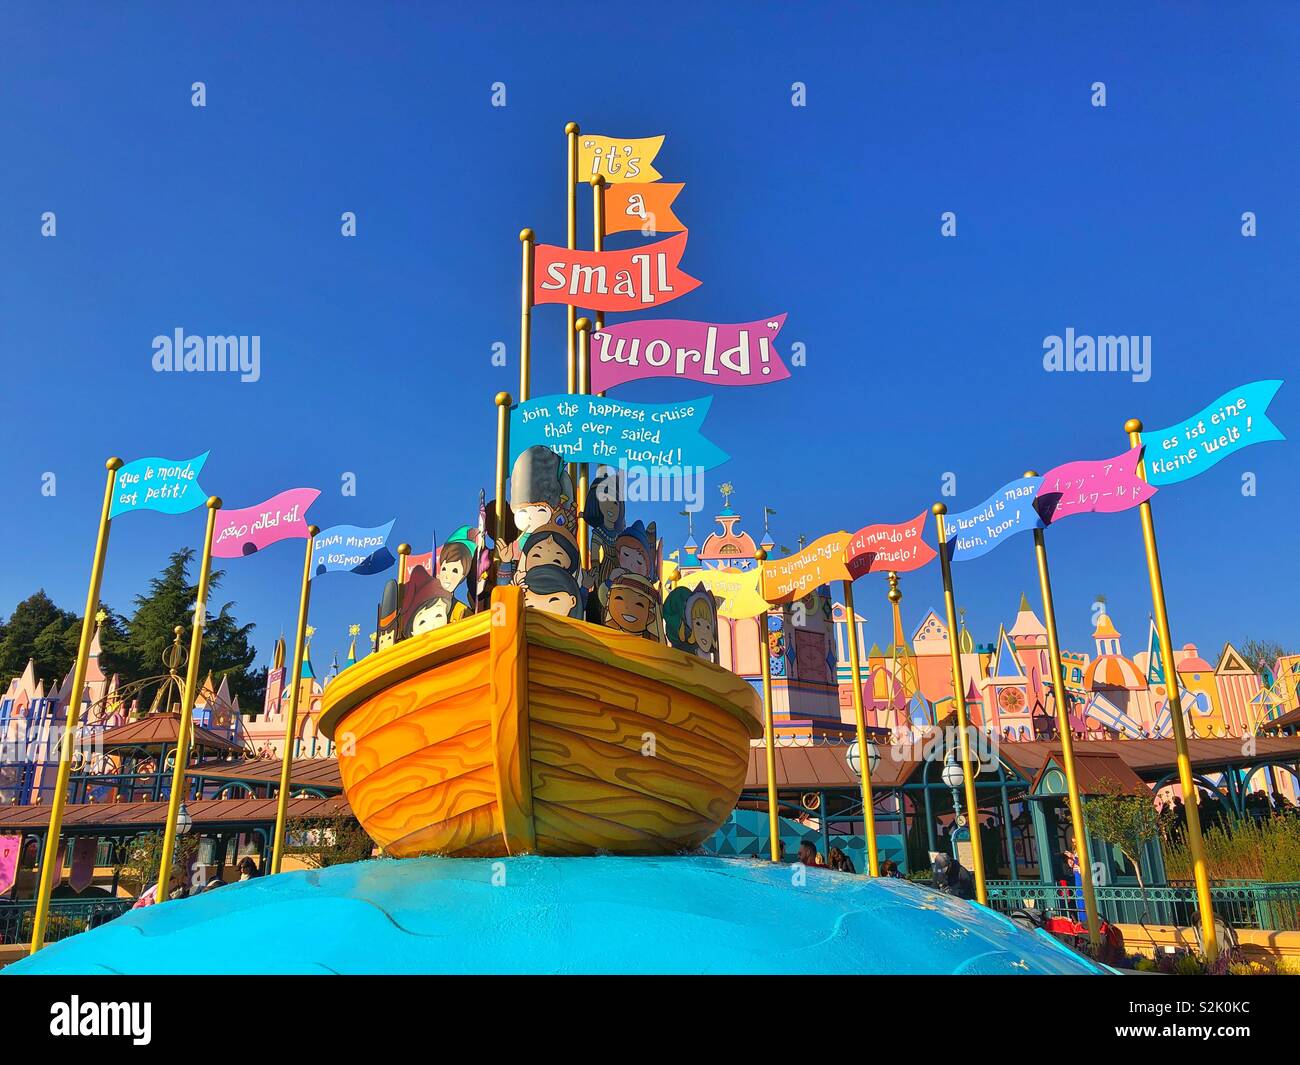 Promotional display for the It’s a small world ride at Disneyland Paris. Stock Photo